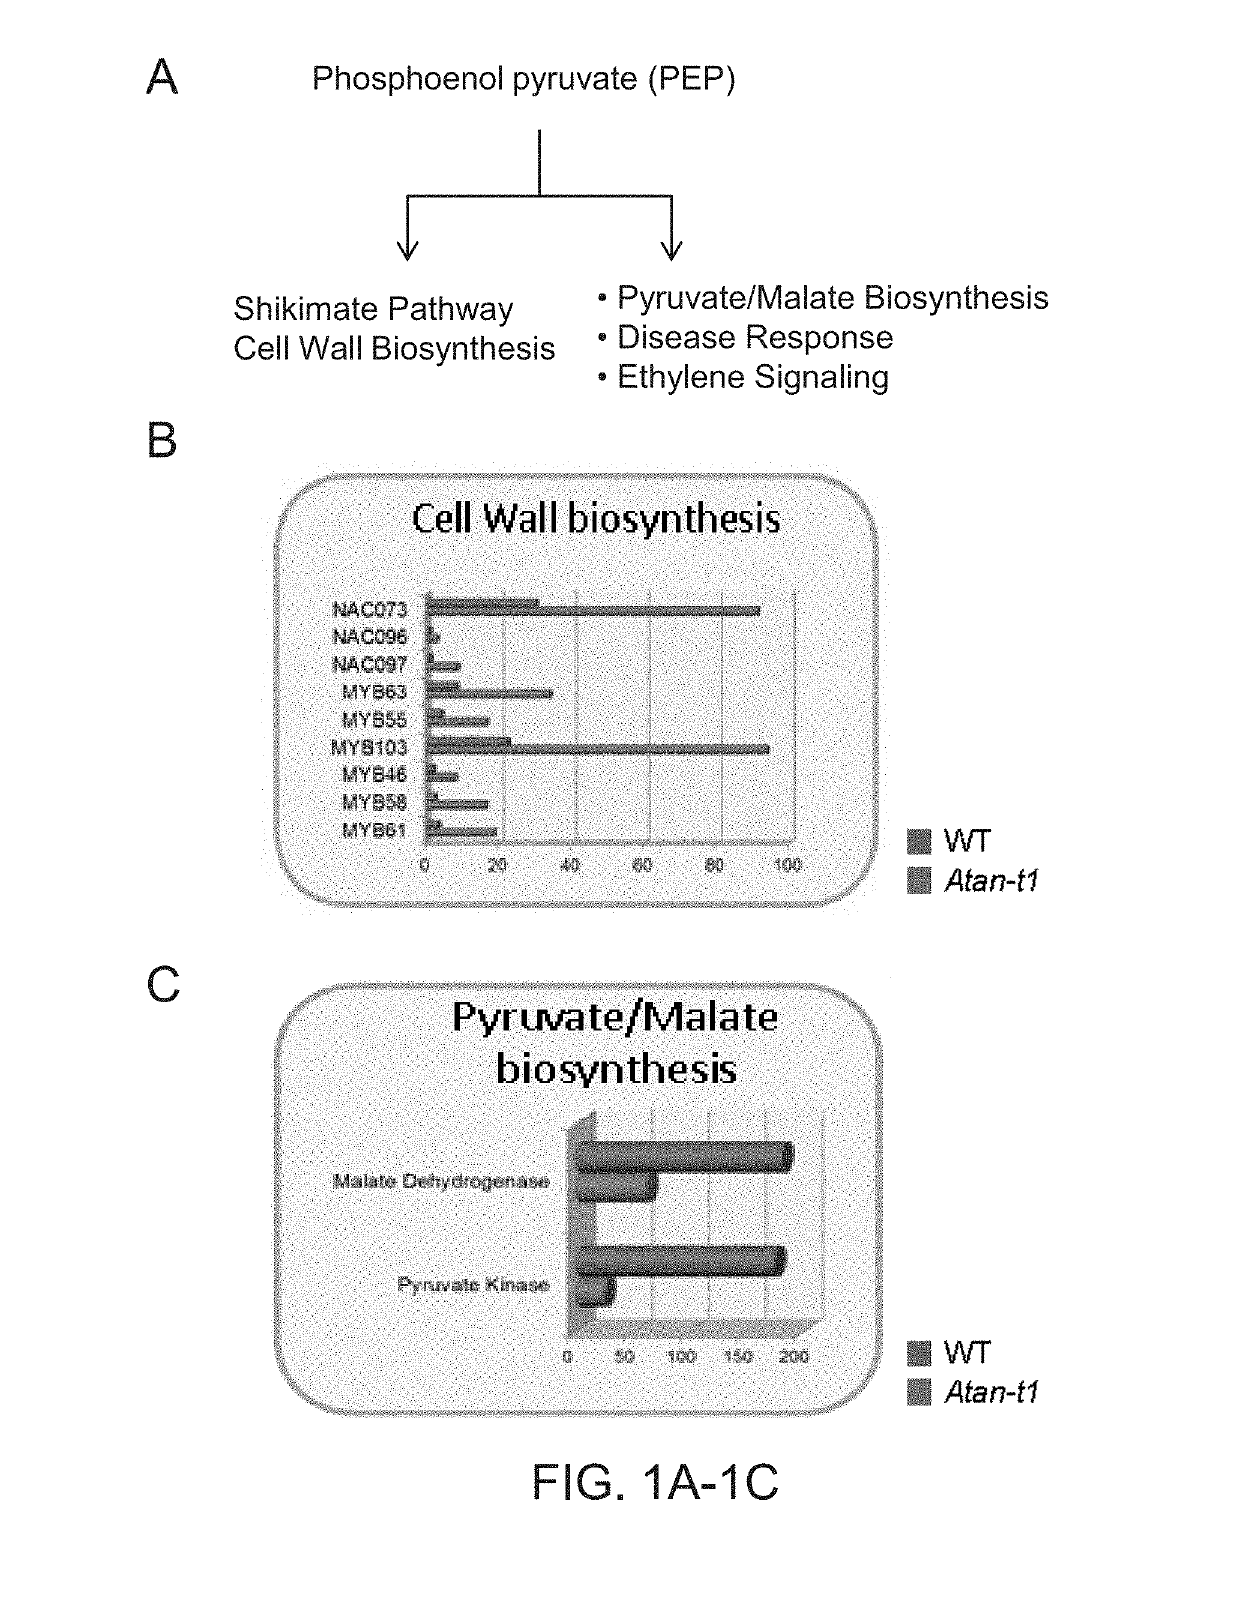 Methods of controlling vegetative growth and flowering times by modulating phosphoenolpyruvate shunt between shikimate and glycolysis pathways